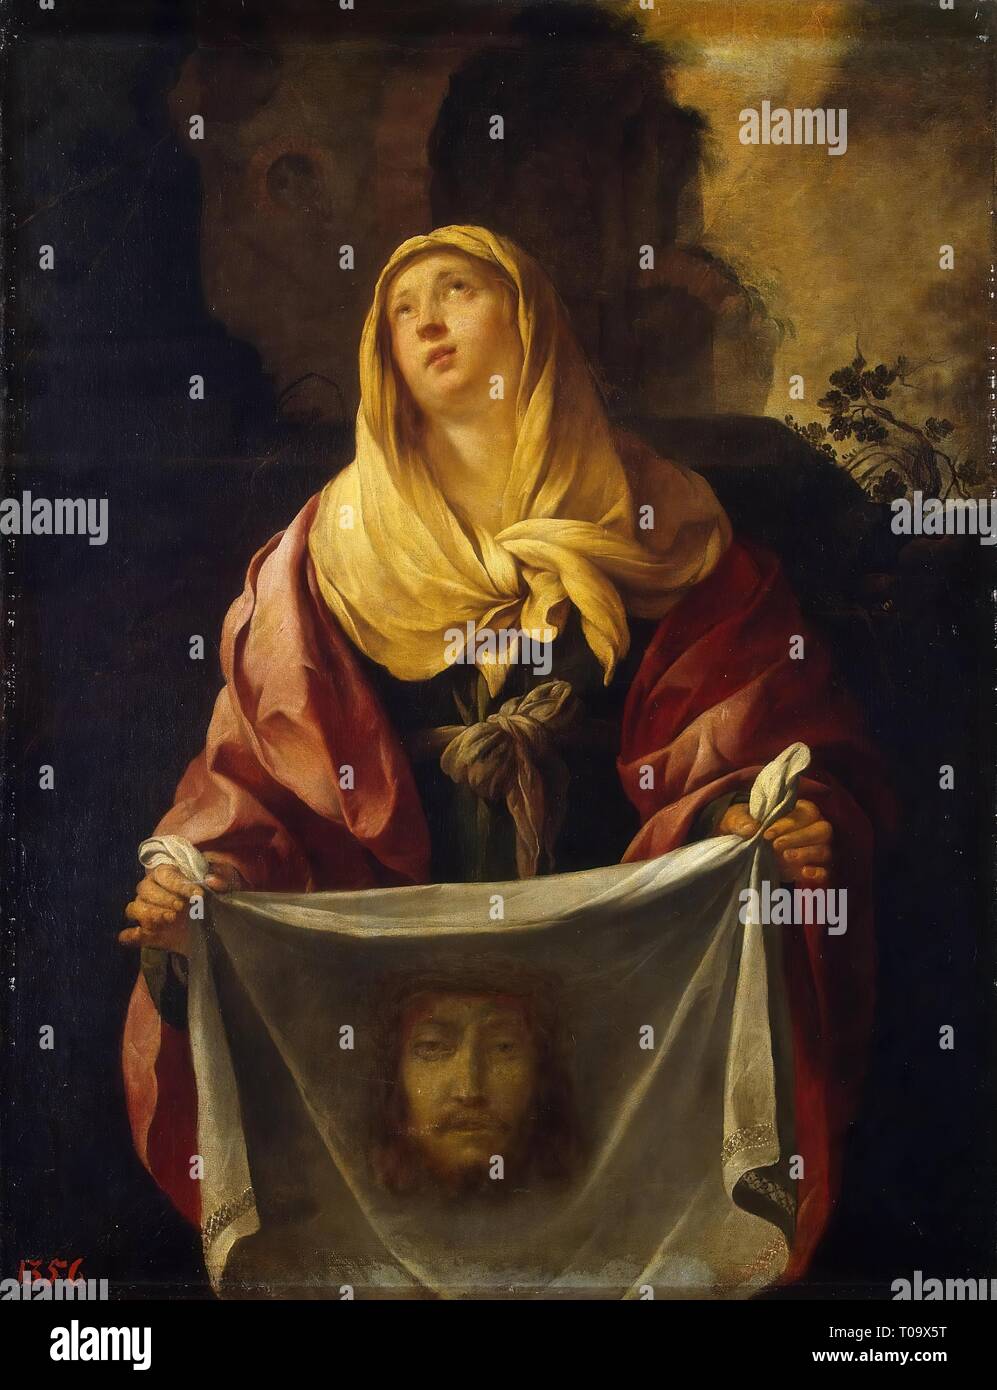 'St Veronica'. France, Circa 1633/1634. Dimensions: 127x98 cm. Museum: State Hermitage, St. Petersburg. Author: JACQUES BLANCHARD. Stock Photo